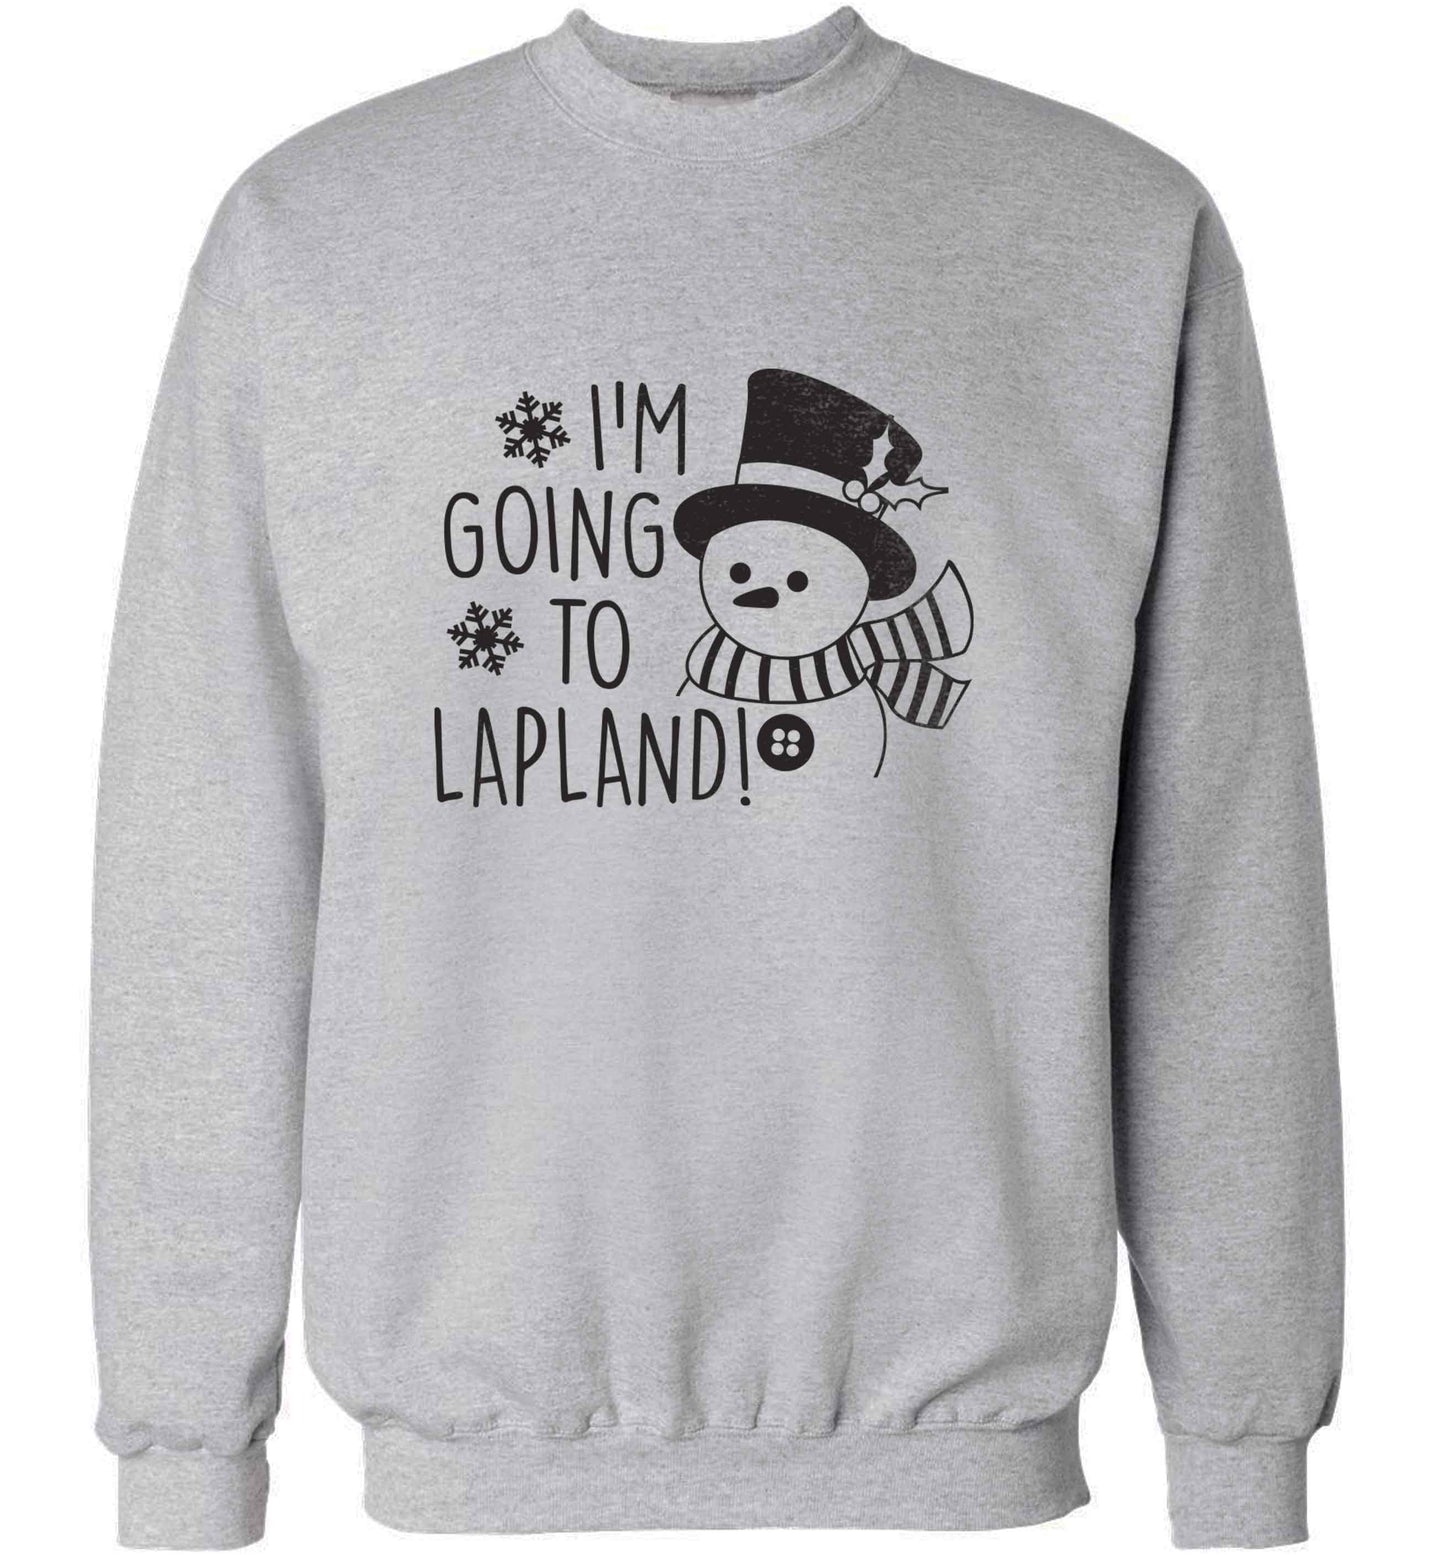 I'm going to Lapland adult's unisex grey sweater 2XL